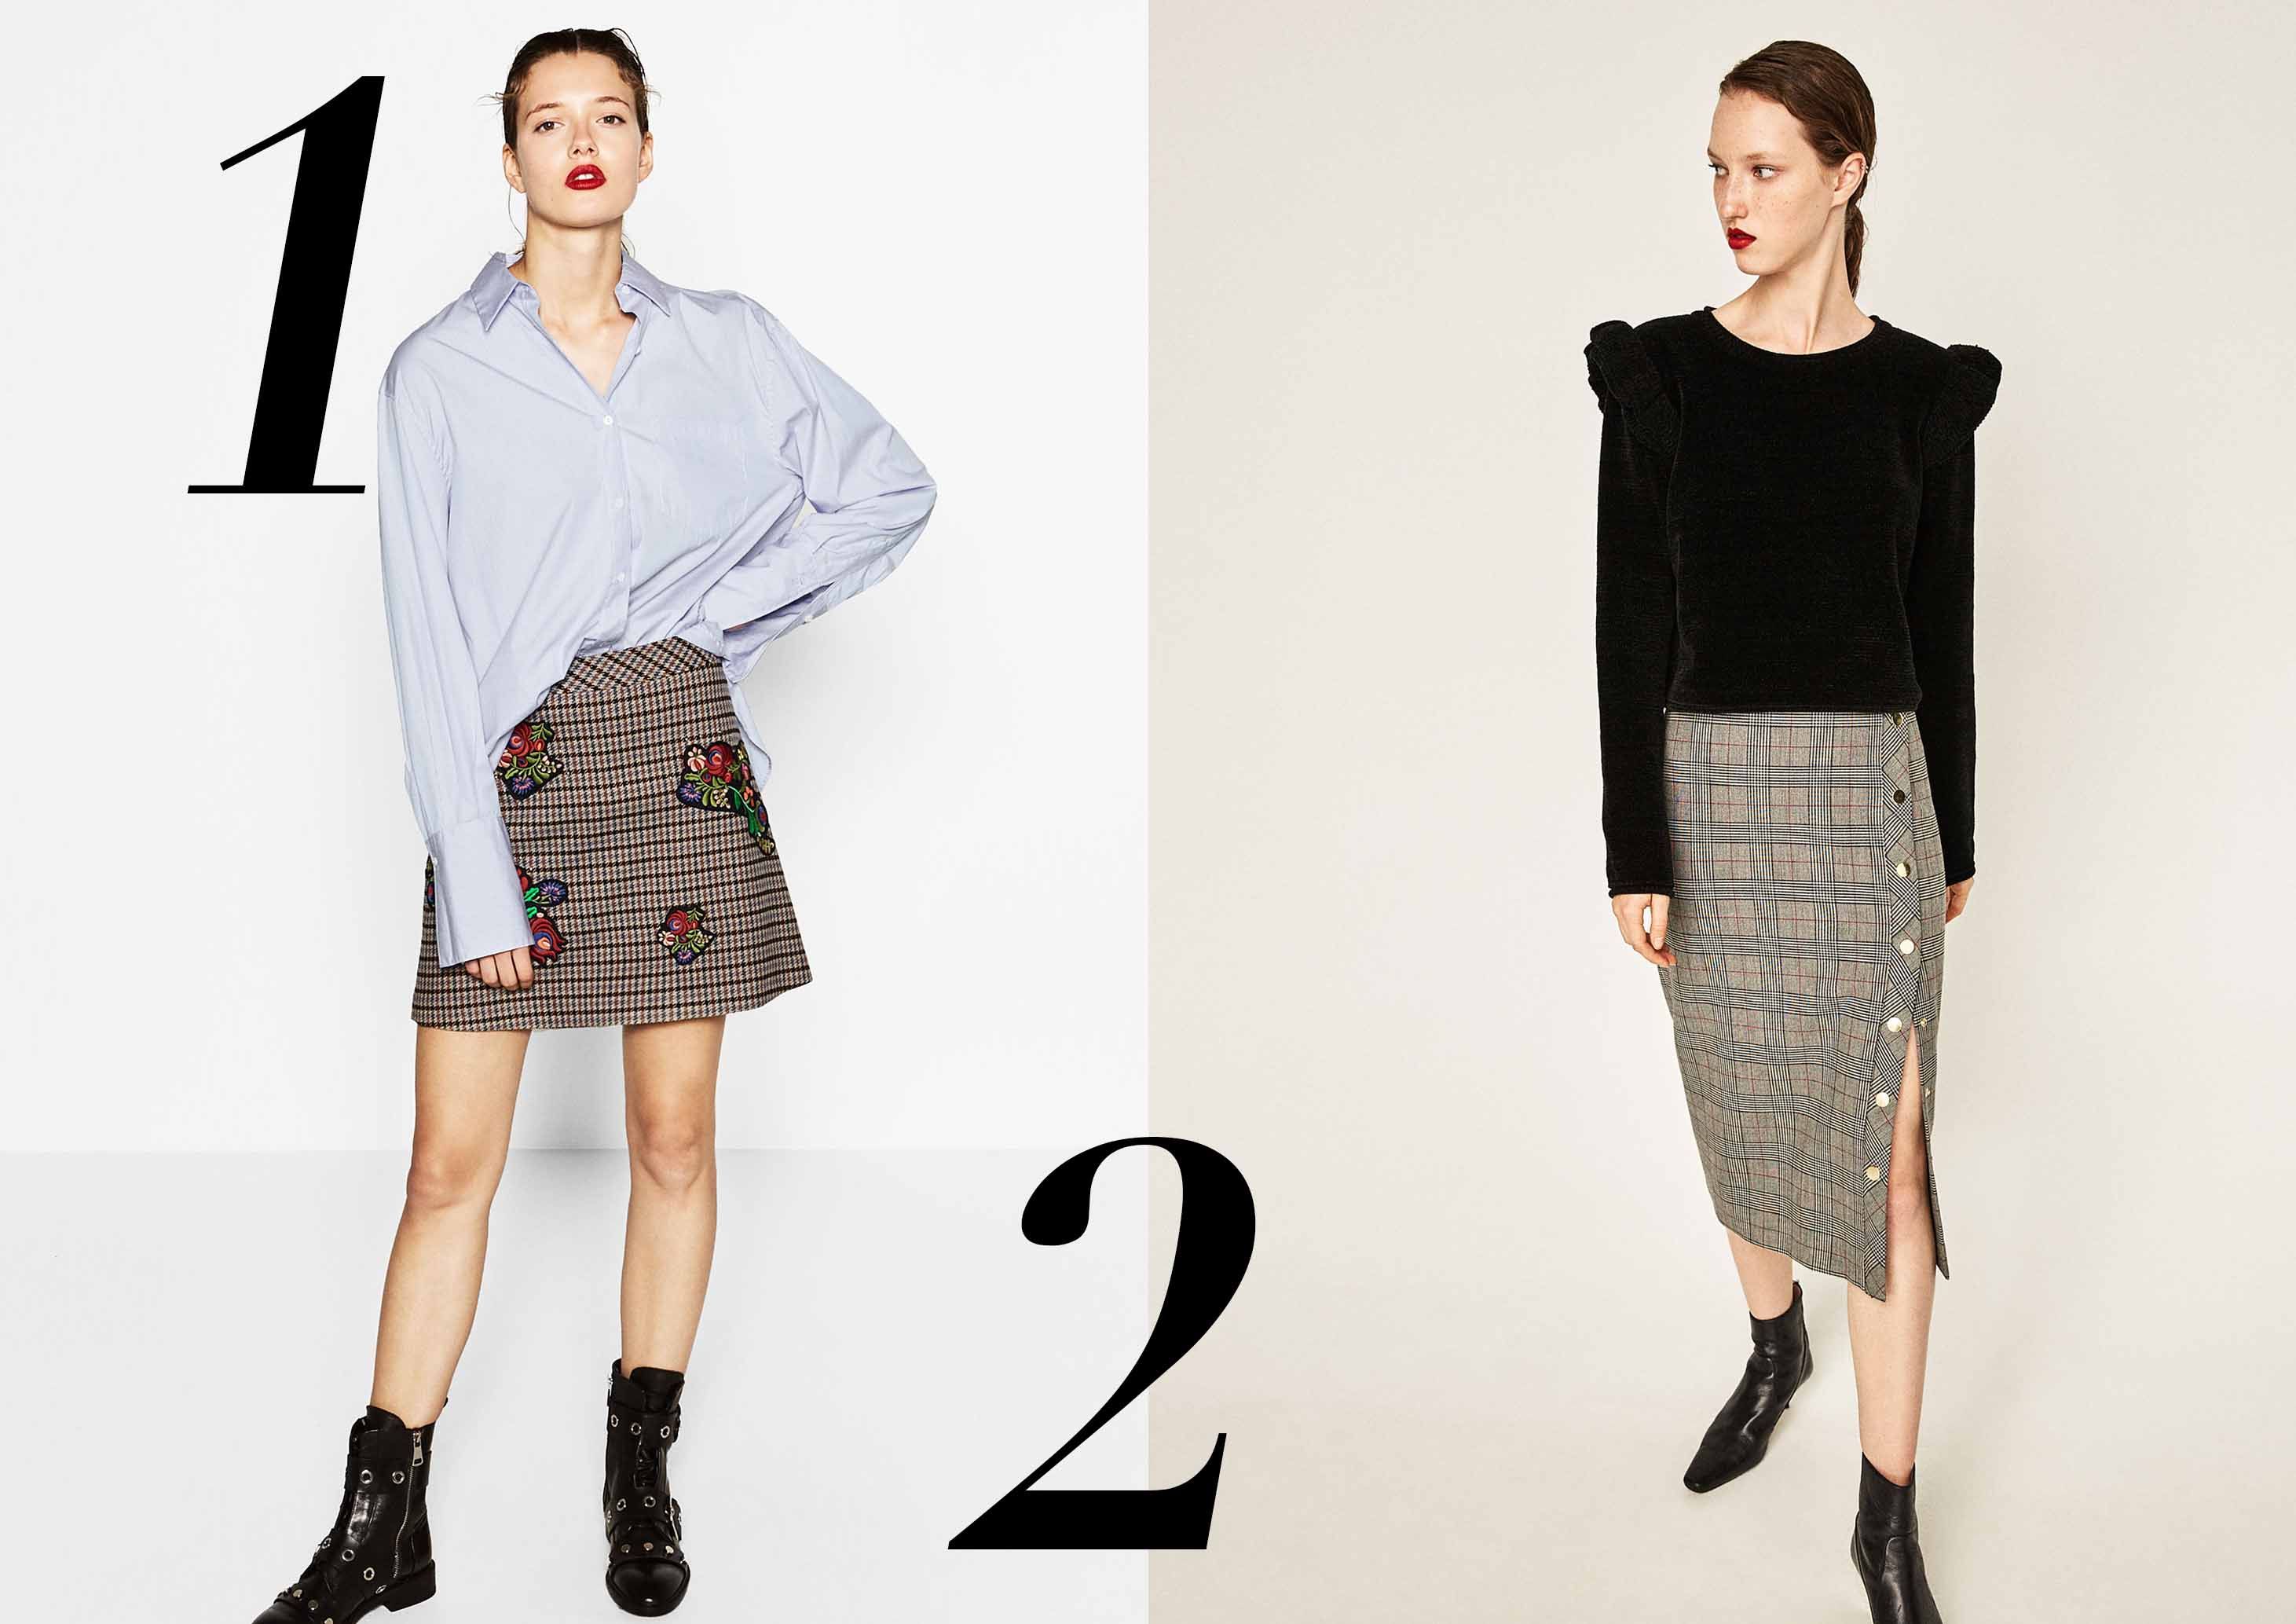 Out of Idea For Office Look?  Let's Show On Point With Plaid Print